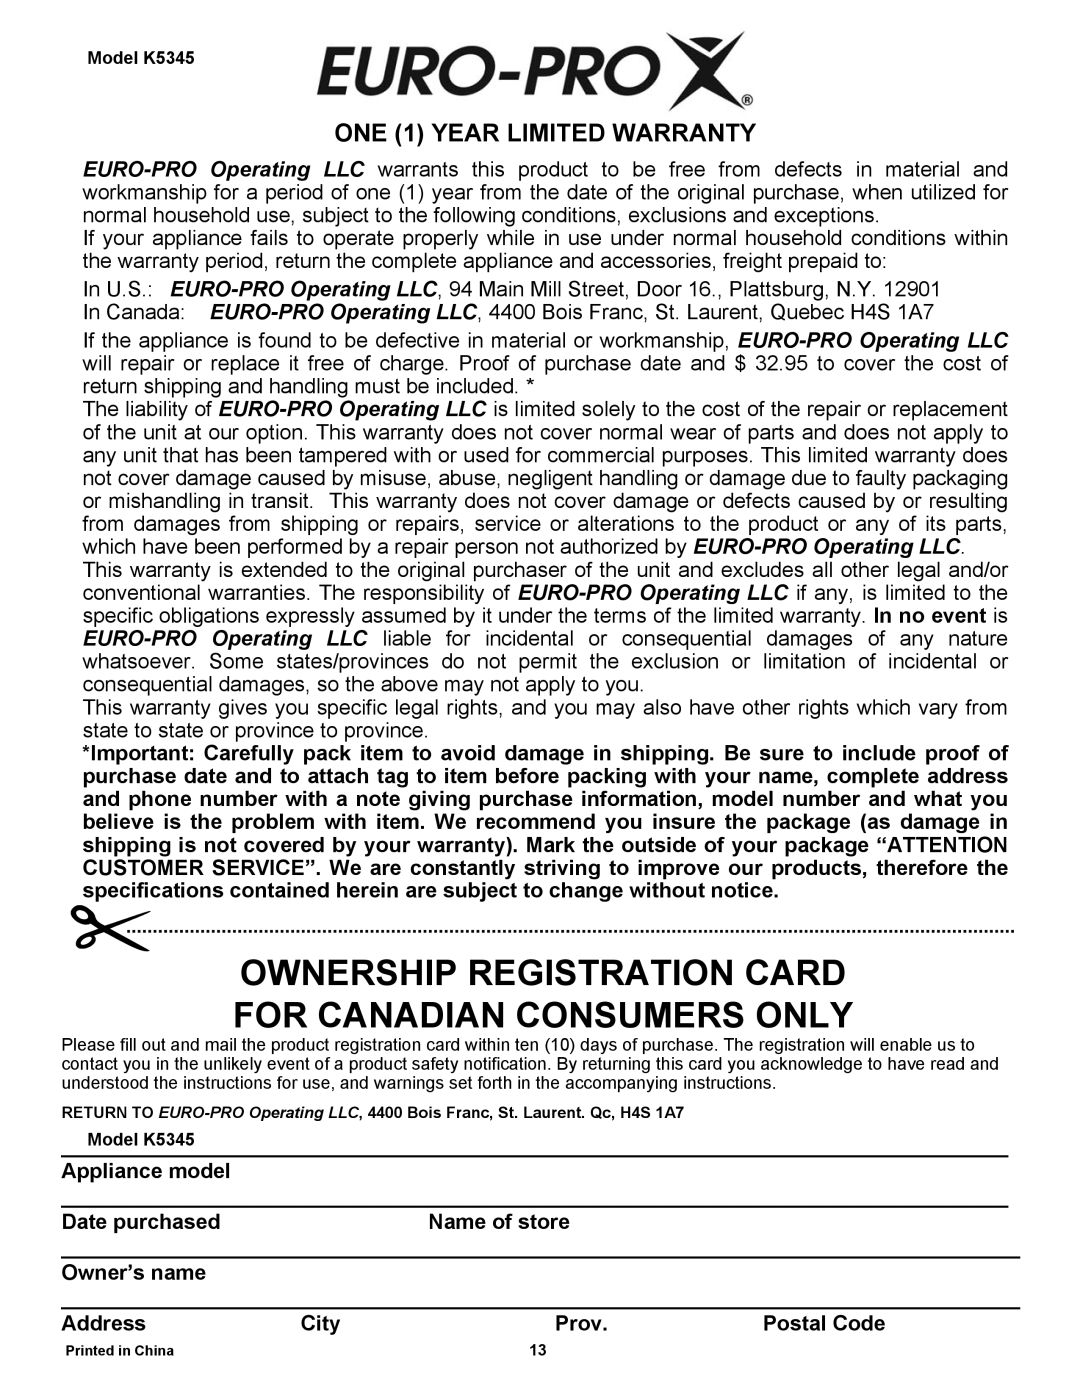 Euro-Pro K5345 owner manual Ownership Registration Card, For Canadian Consumers Only, ONE 1 YEAR LIMITED WARRANTY 